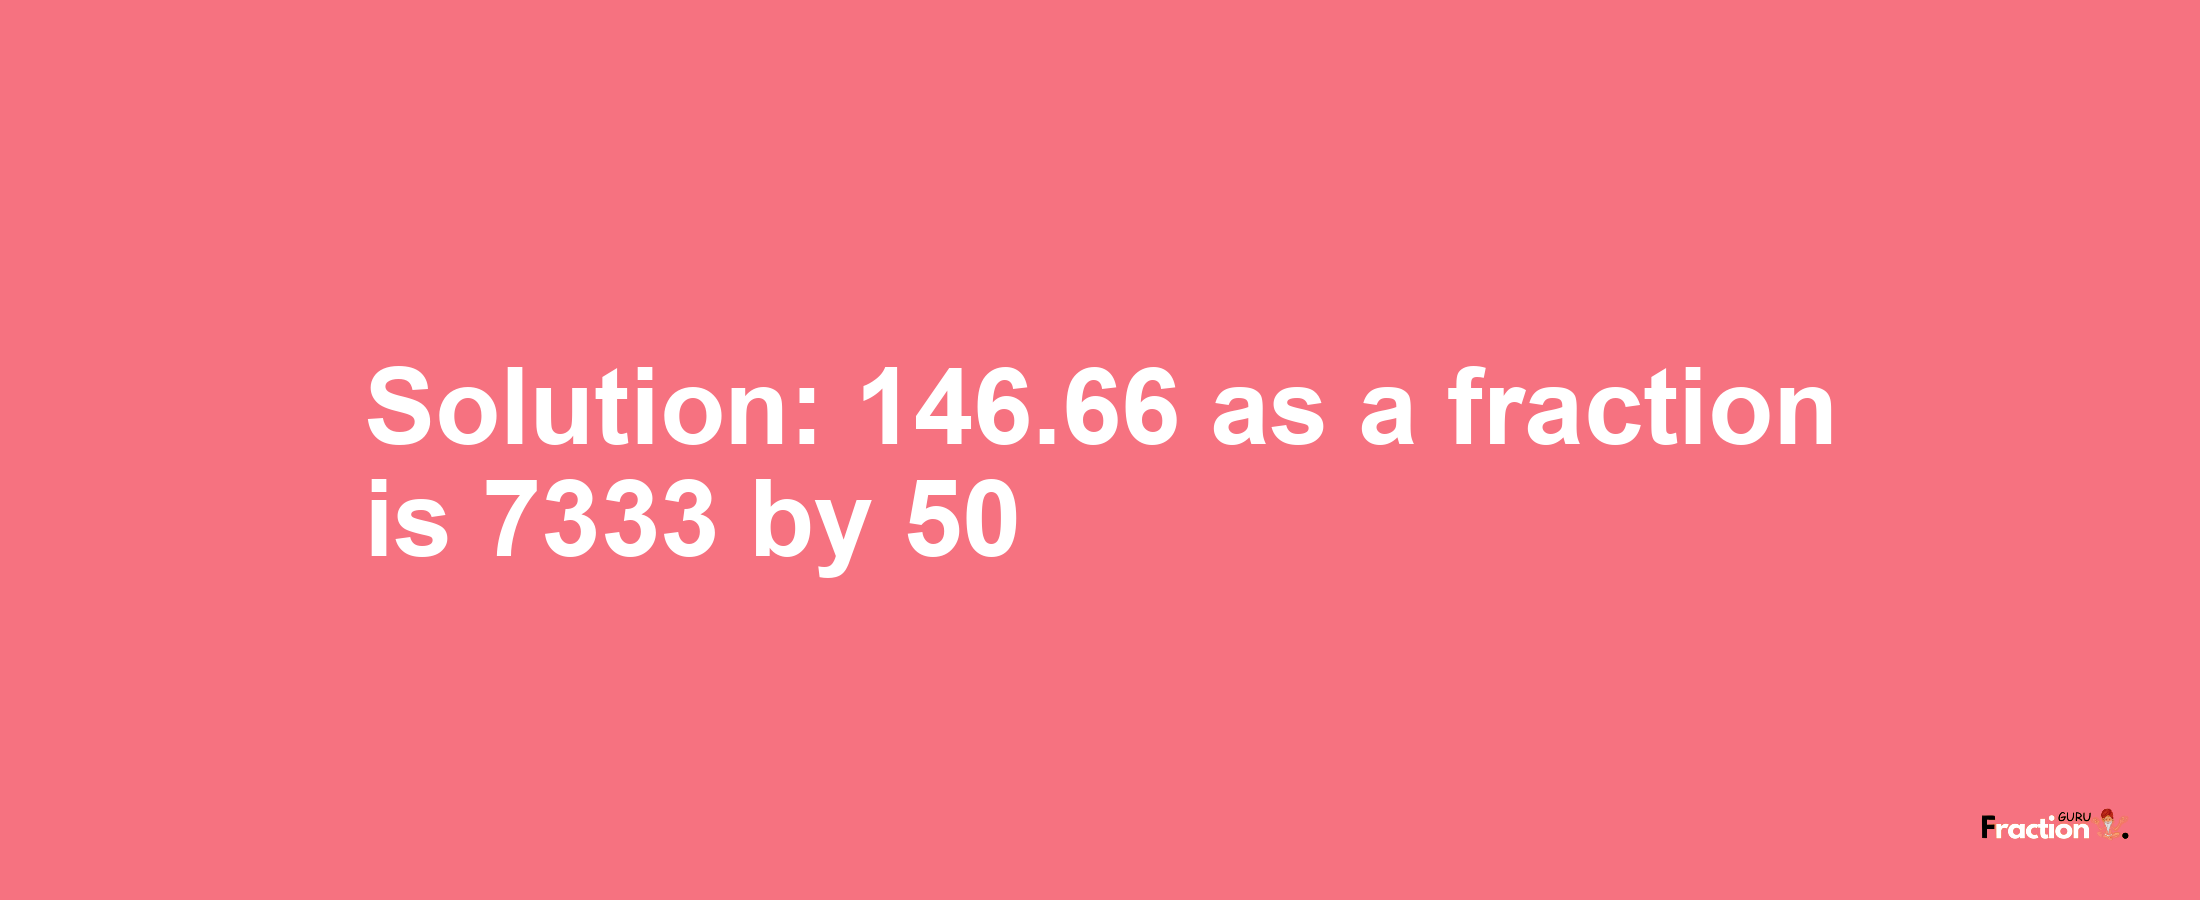 Solution:146.66 as a fraction is 7333/50